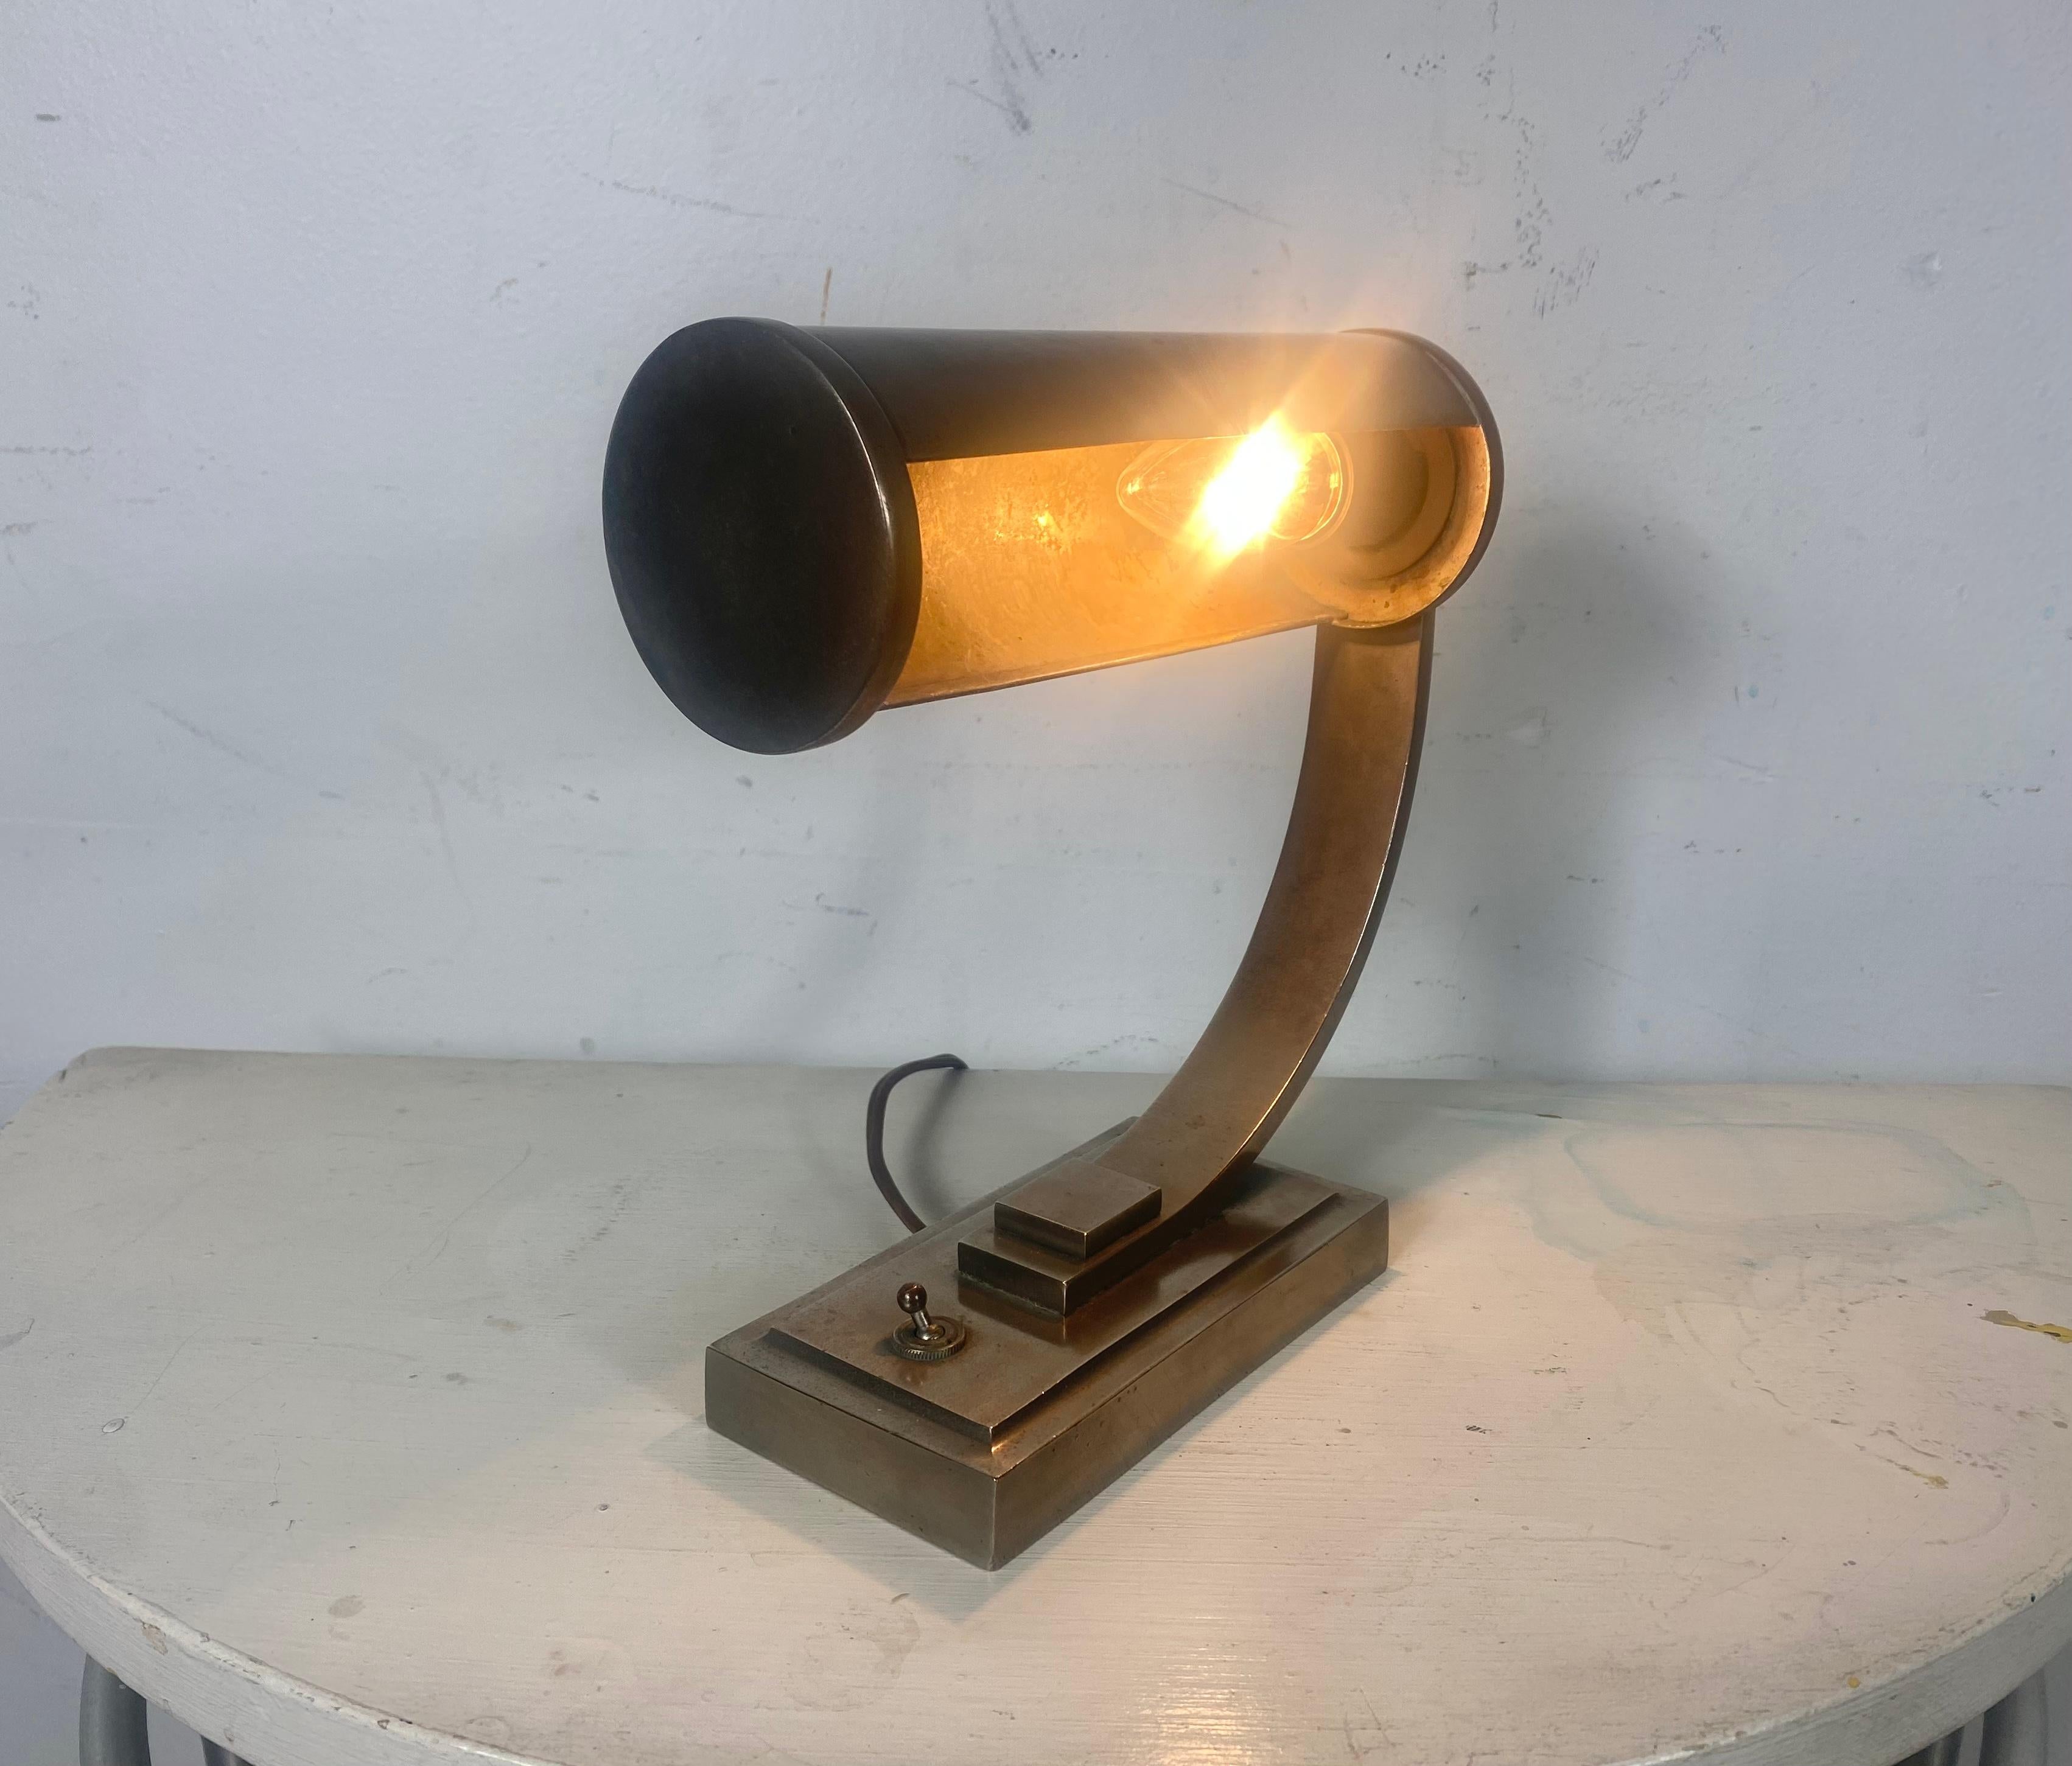 Extremely rare example. Classic Bauhaus / Deco desk lamp designed by Gilbert Rohde. Retains original brushed nickel finish. Patina, also original on/0ff switch, Lamp has been re-wired, tested and working perfectly.